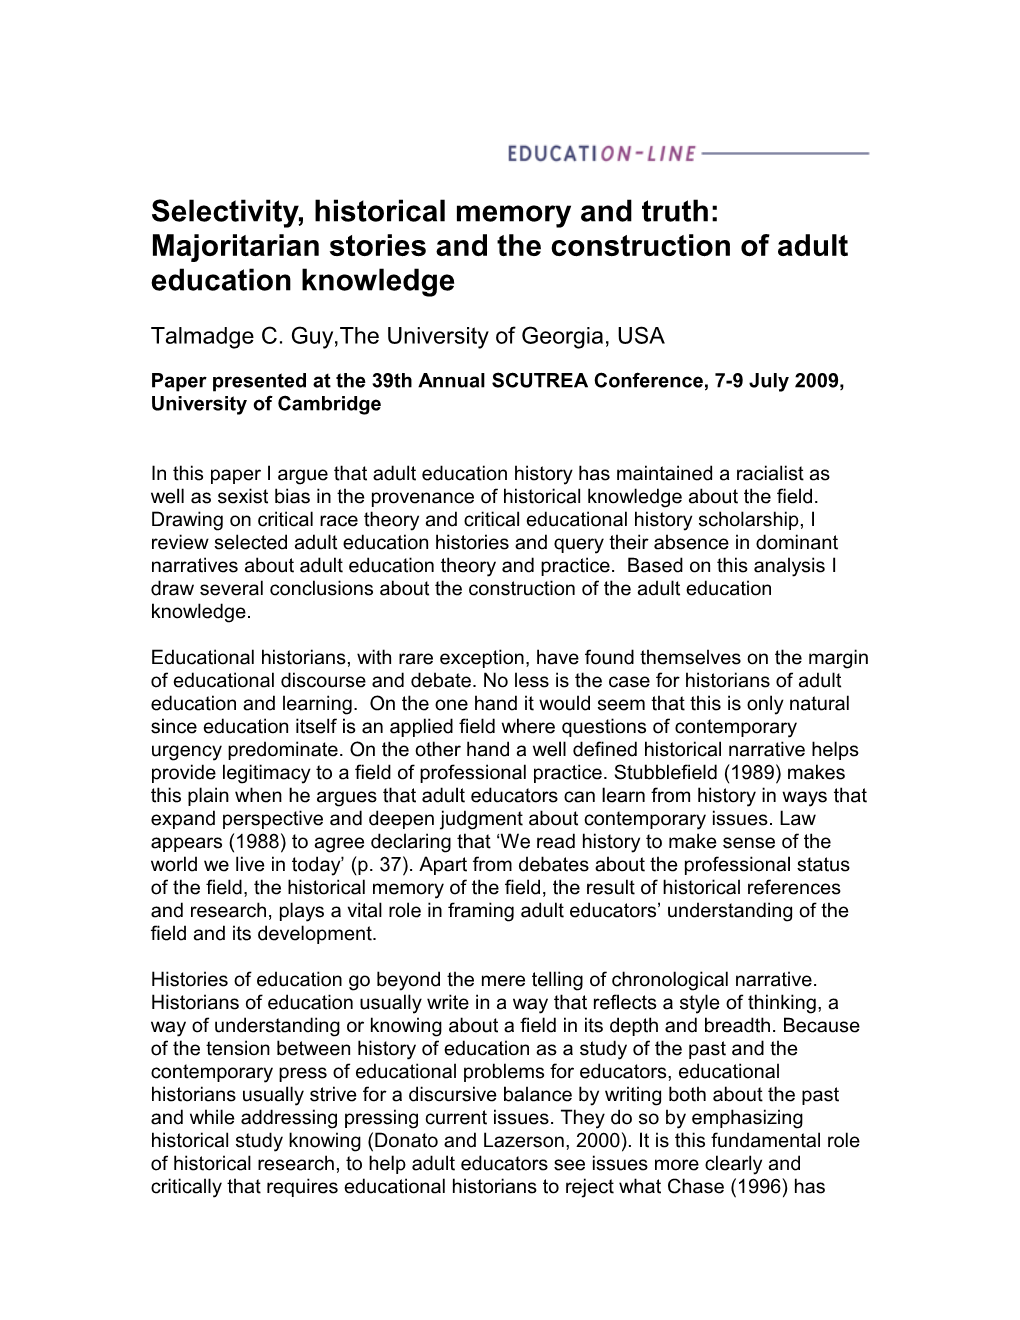 Selectivity, Historical Memory and Truth: Majoritarian Stories and the Construction Of